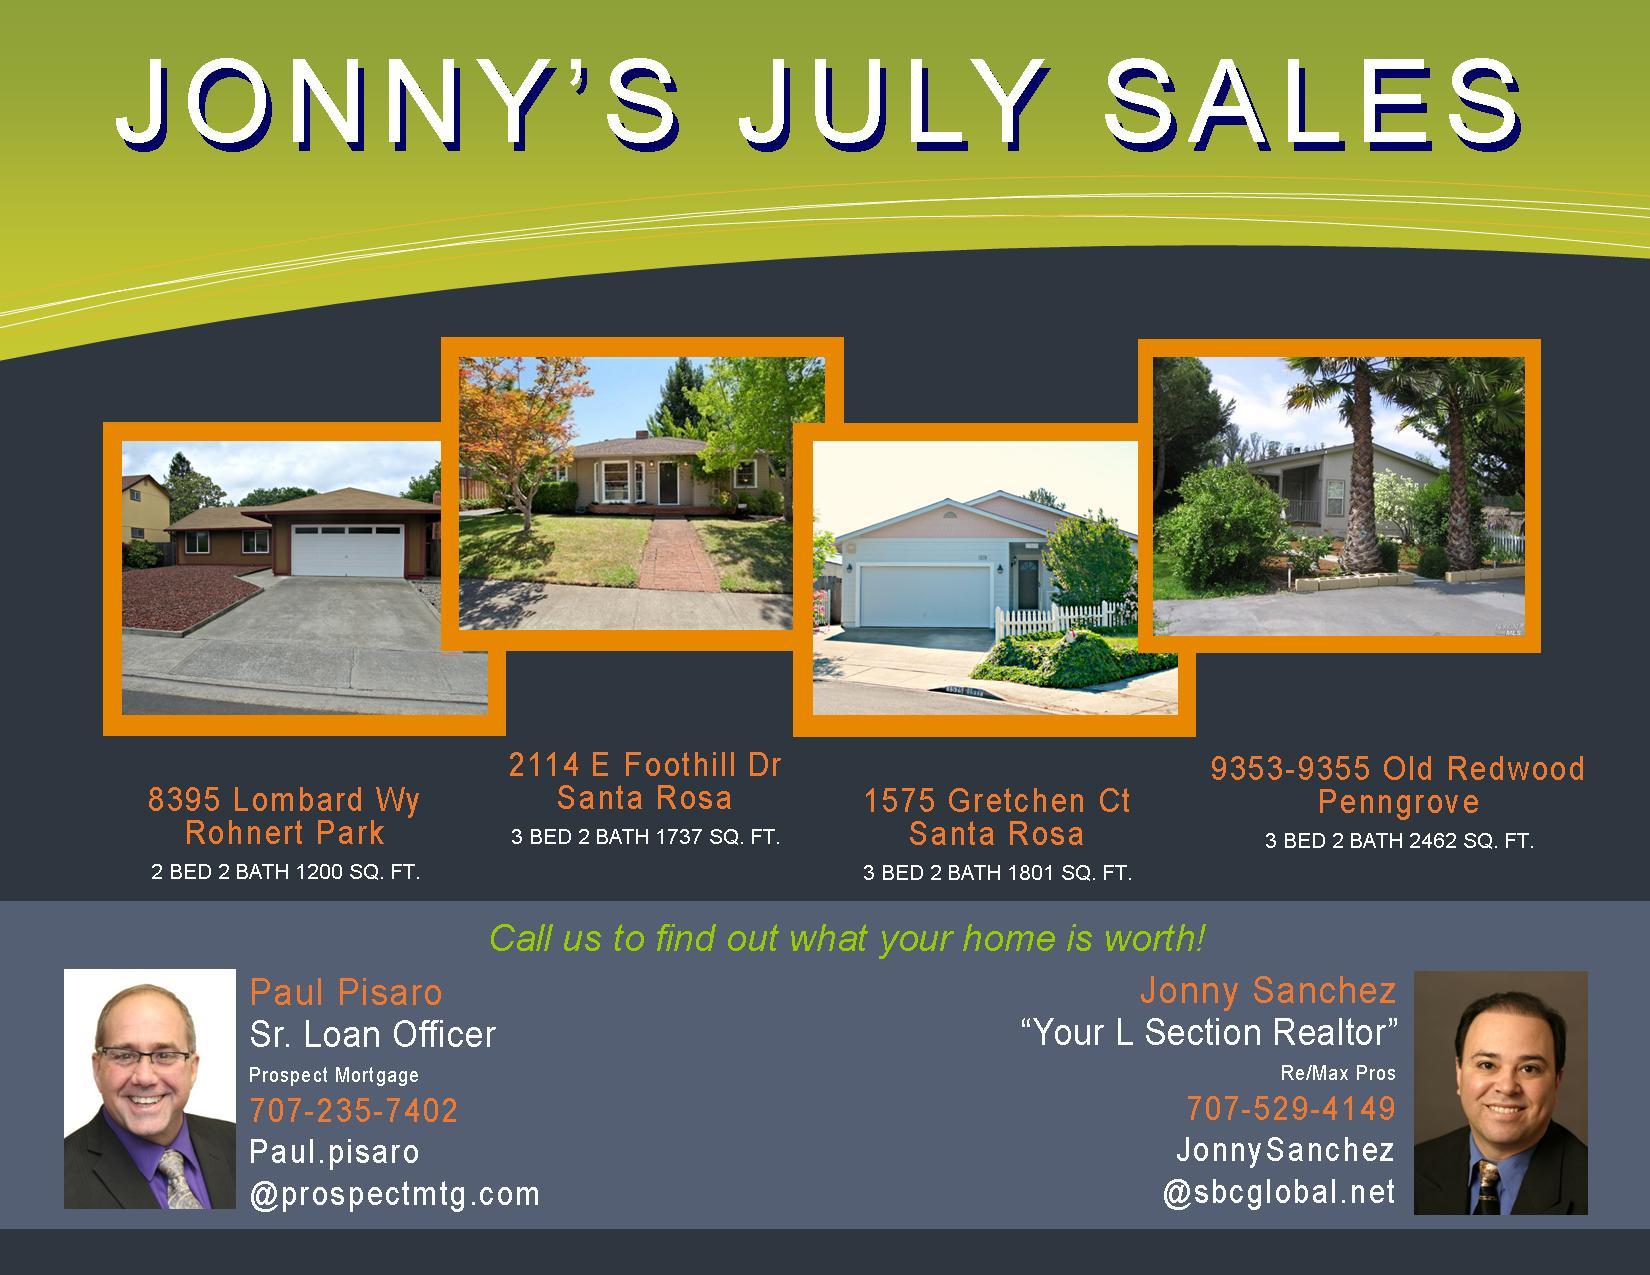 Listings and sales that I participated in during the month of July 2015. 